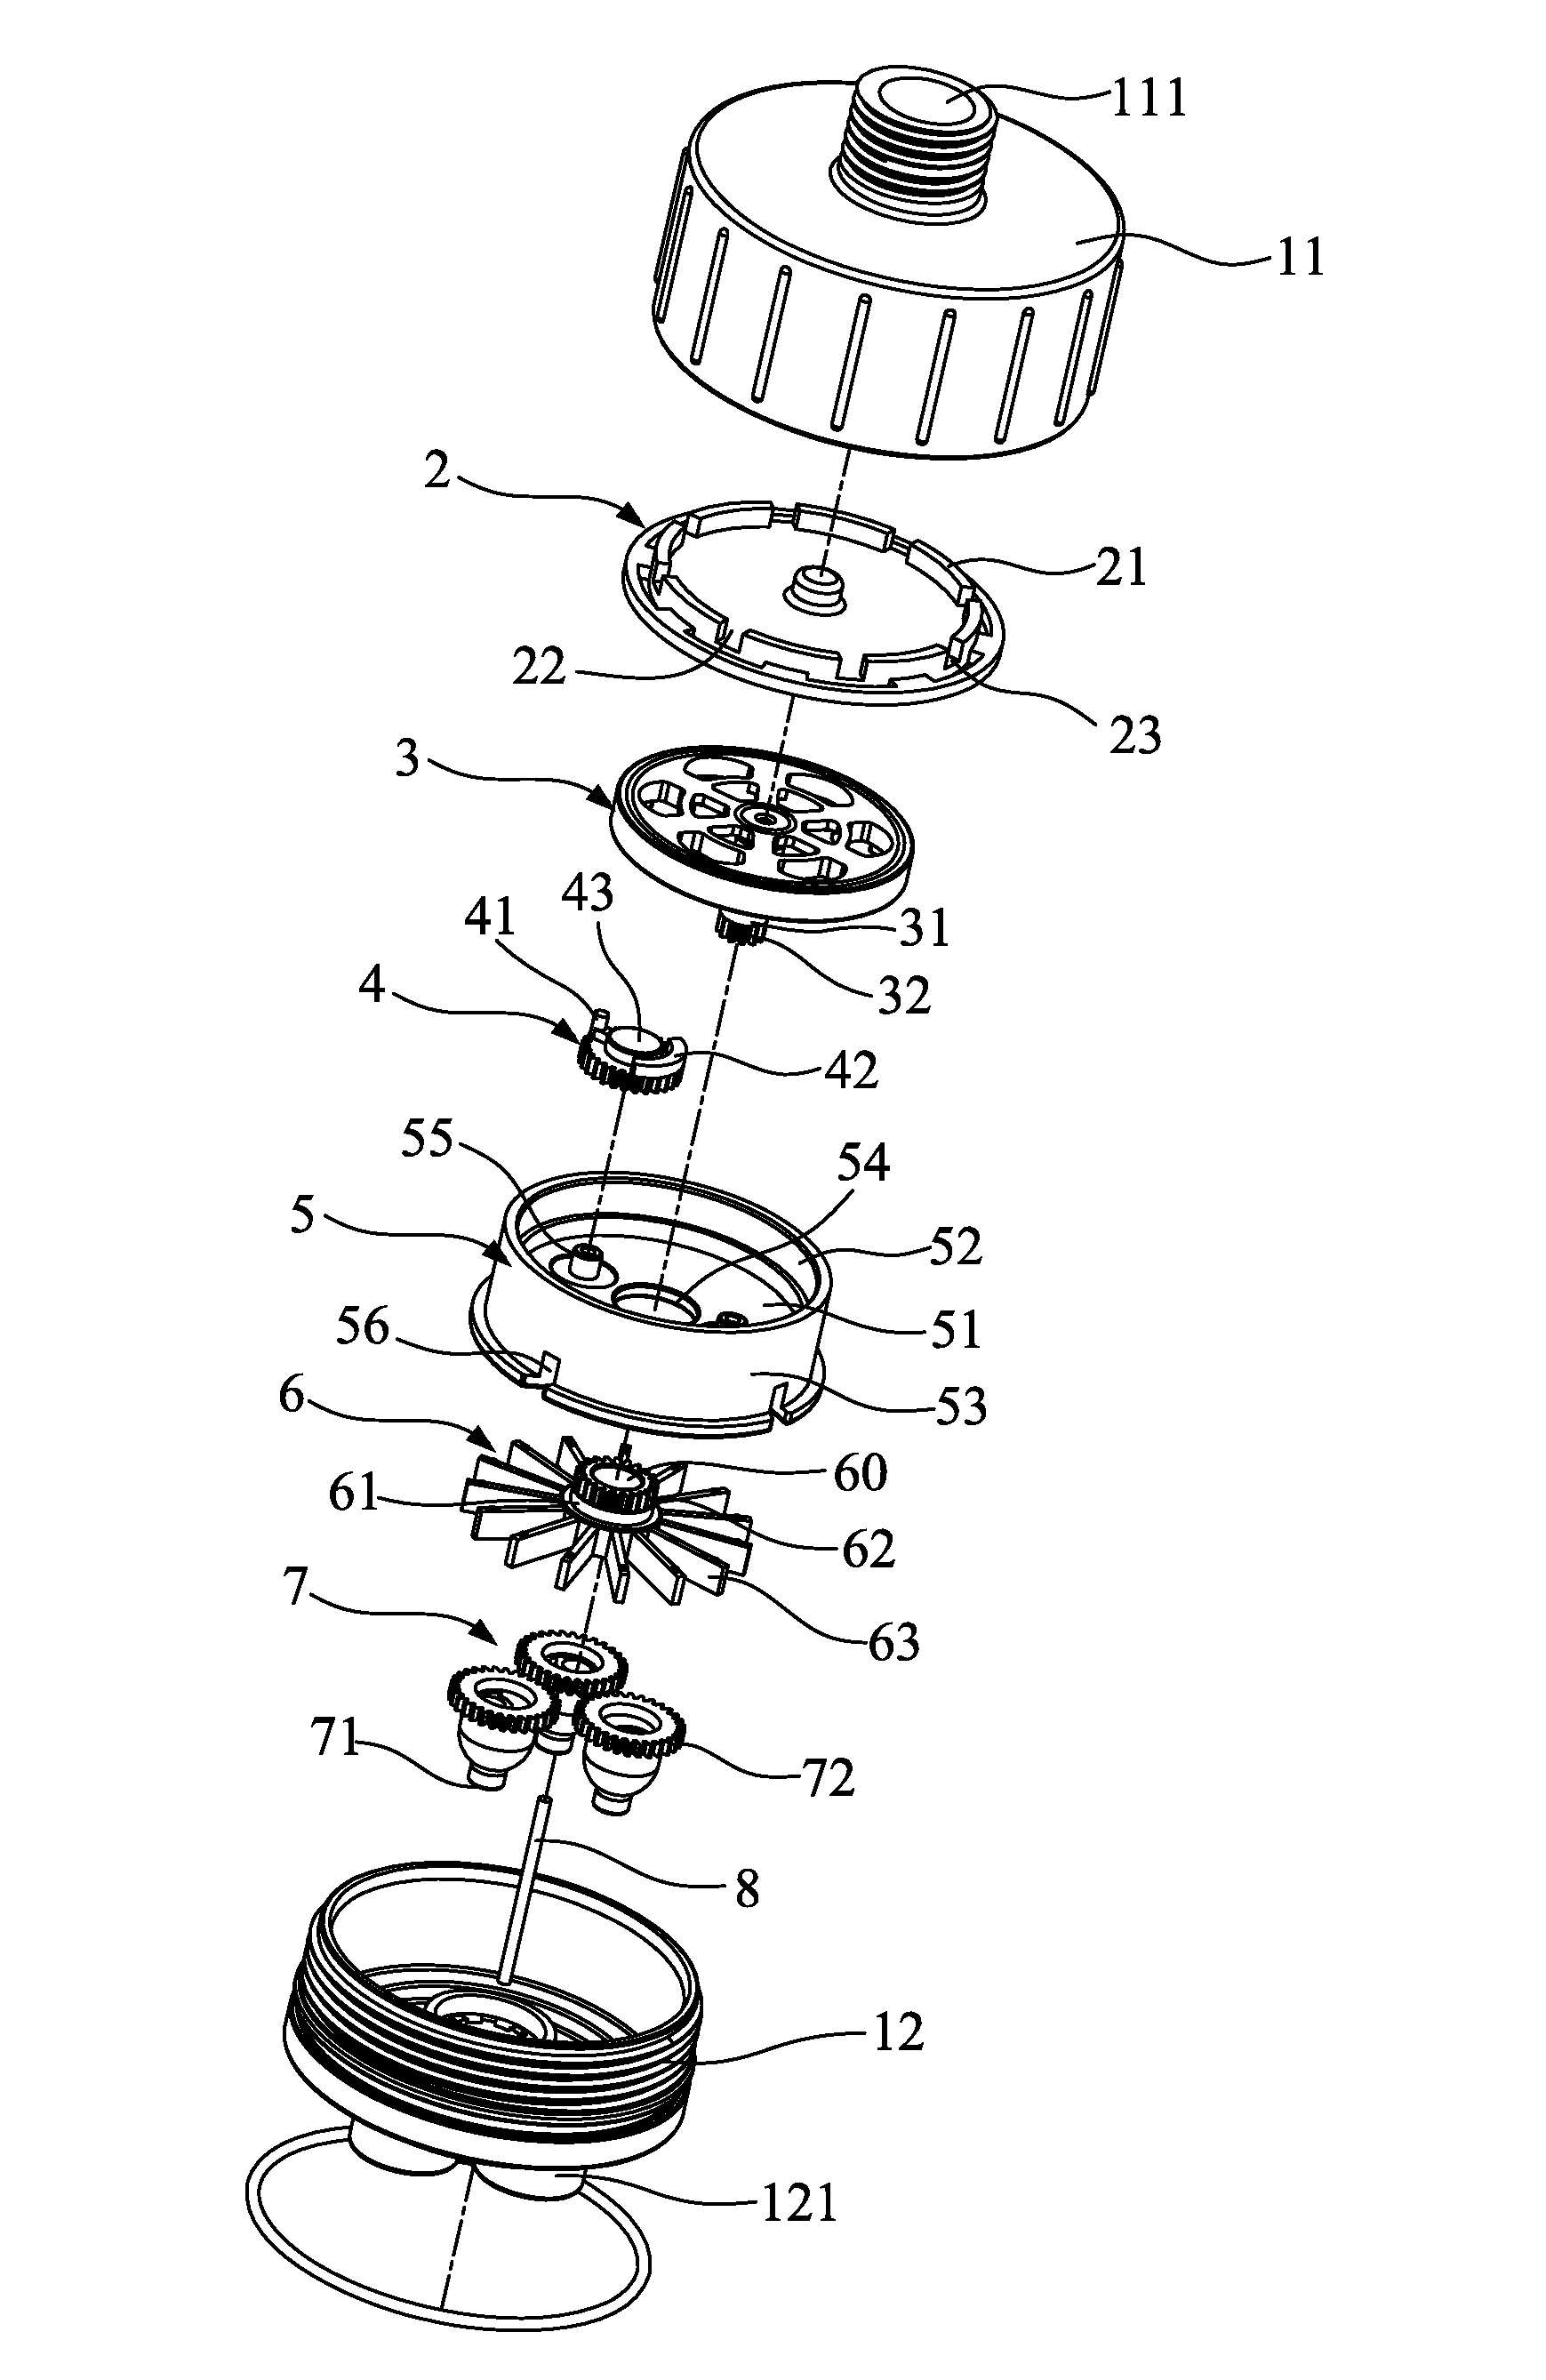 Shower water rotating structure